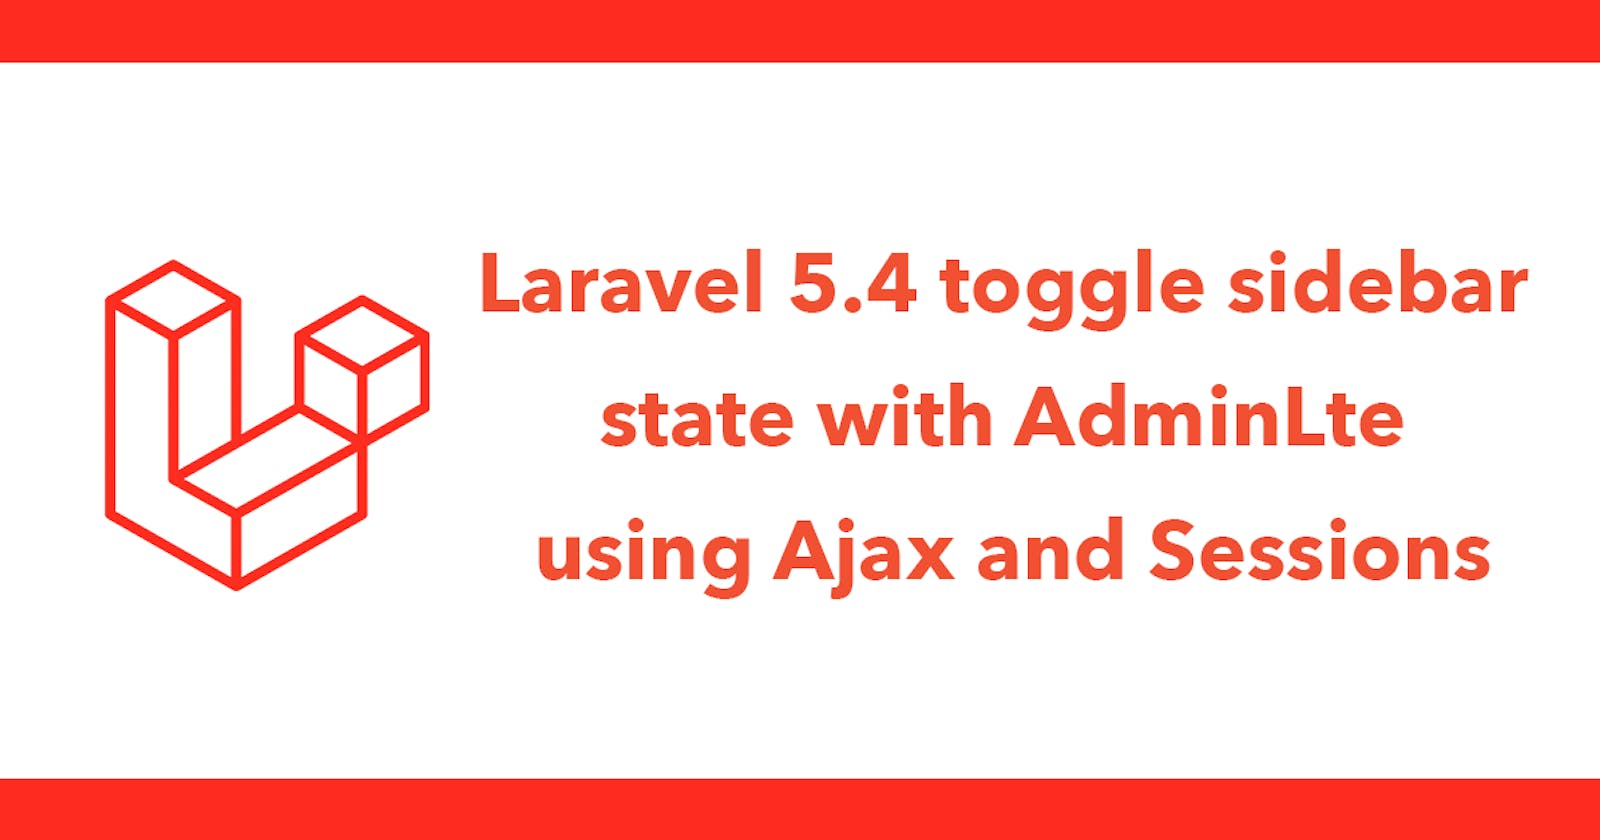 Laravel 5.4 toggle sidebar state with AdminLte using Ajax and Sessions